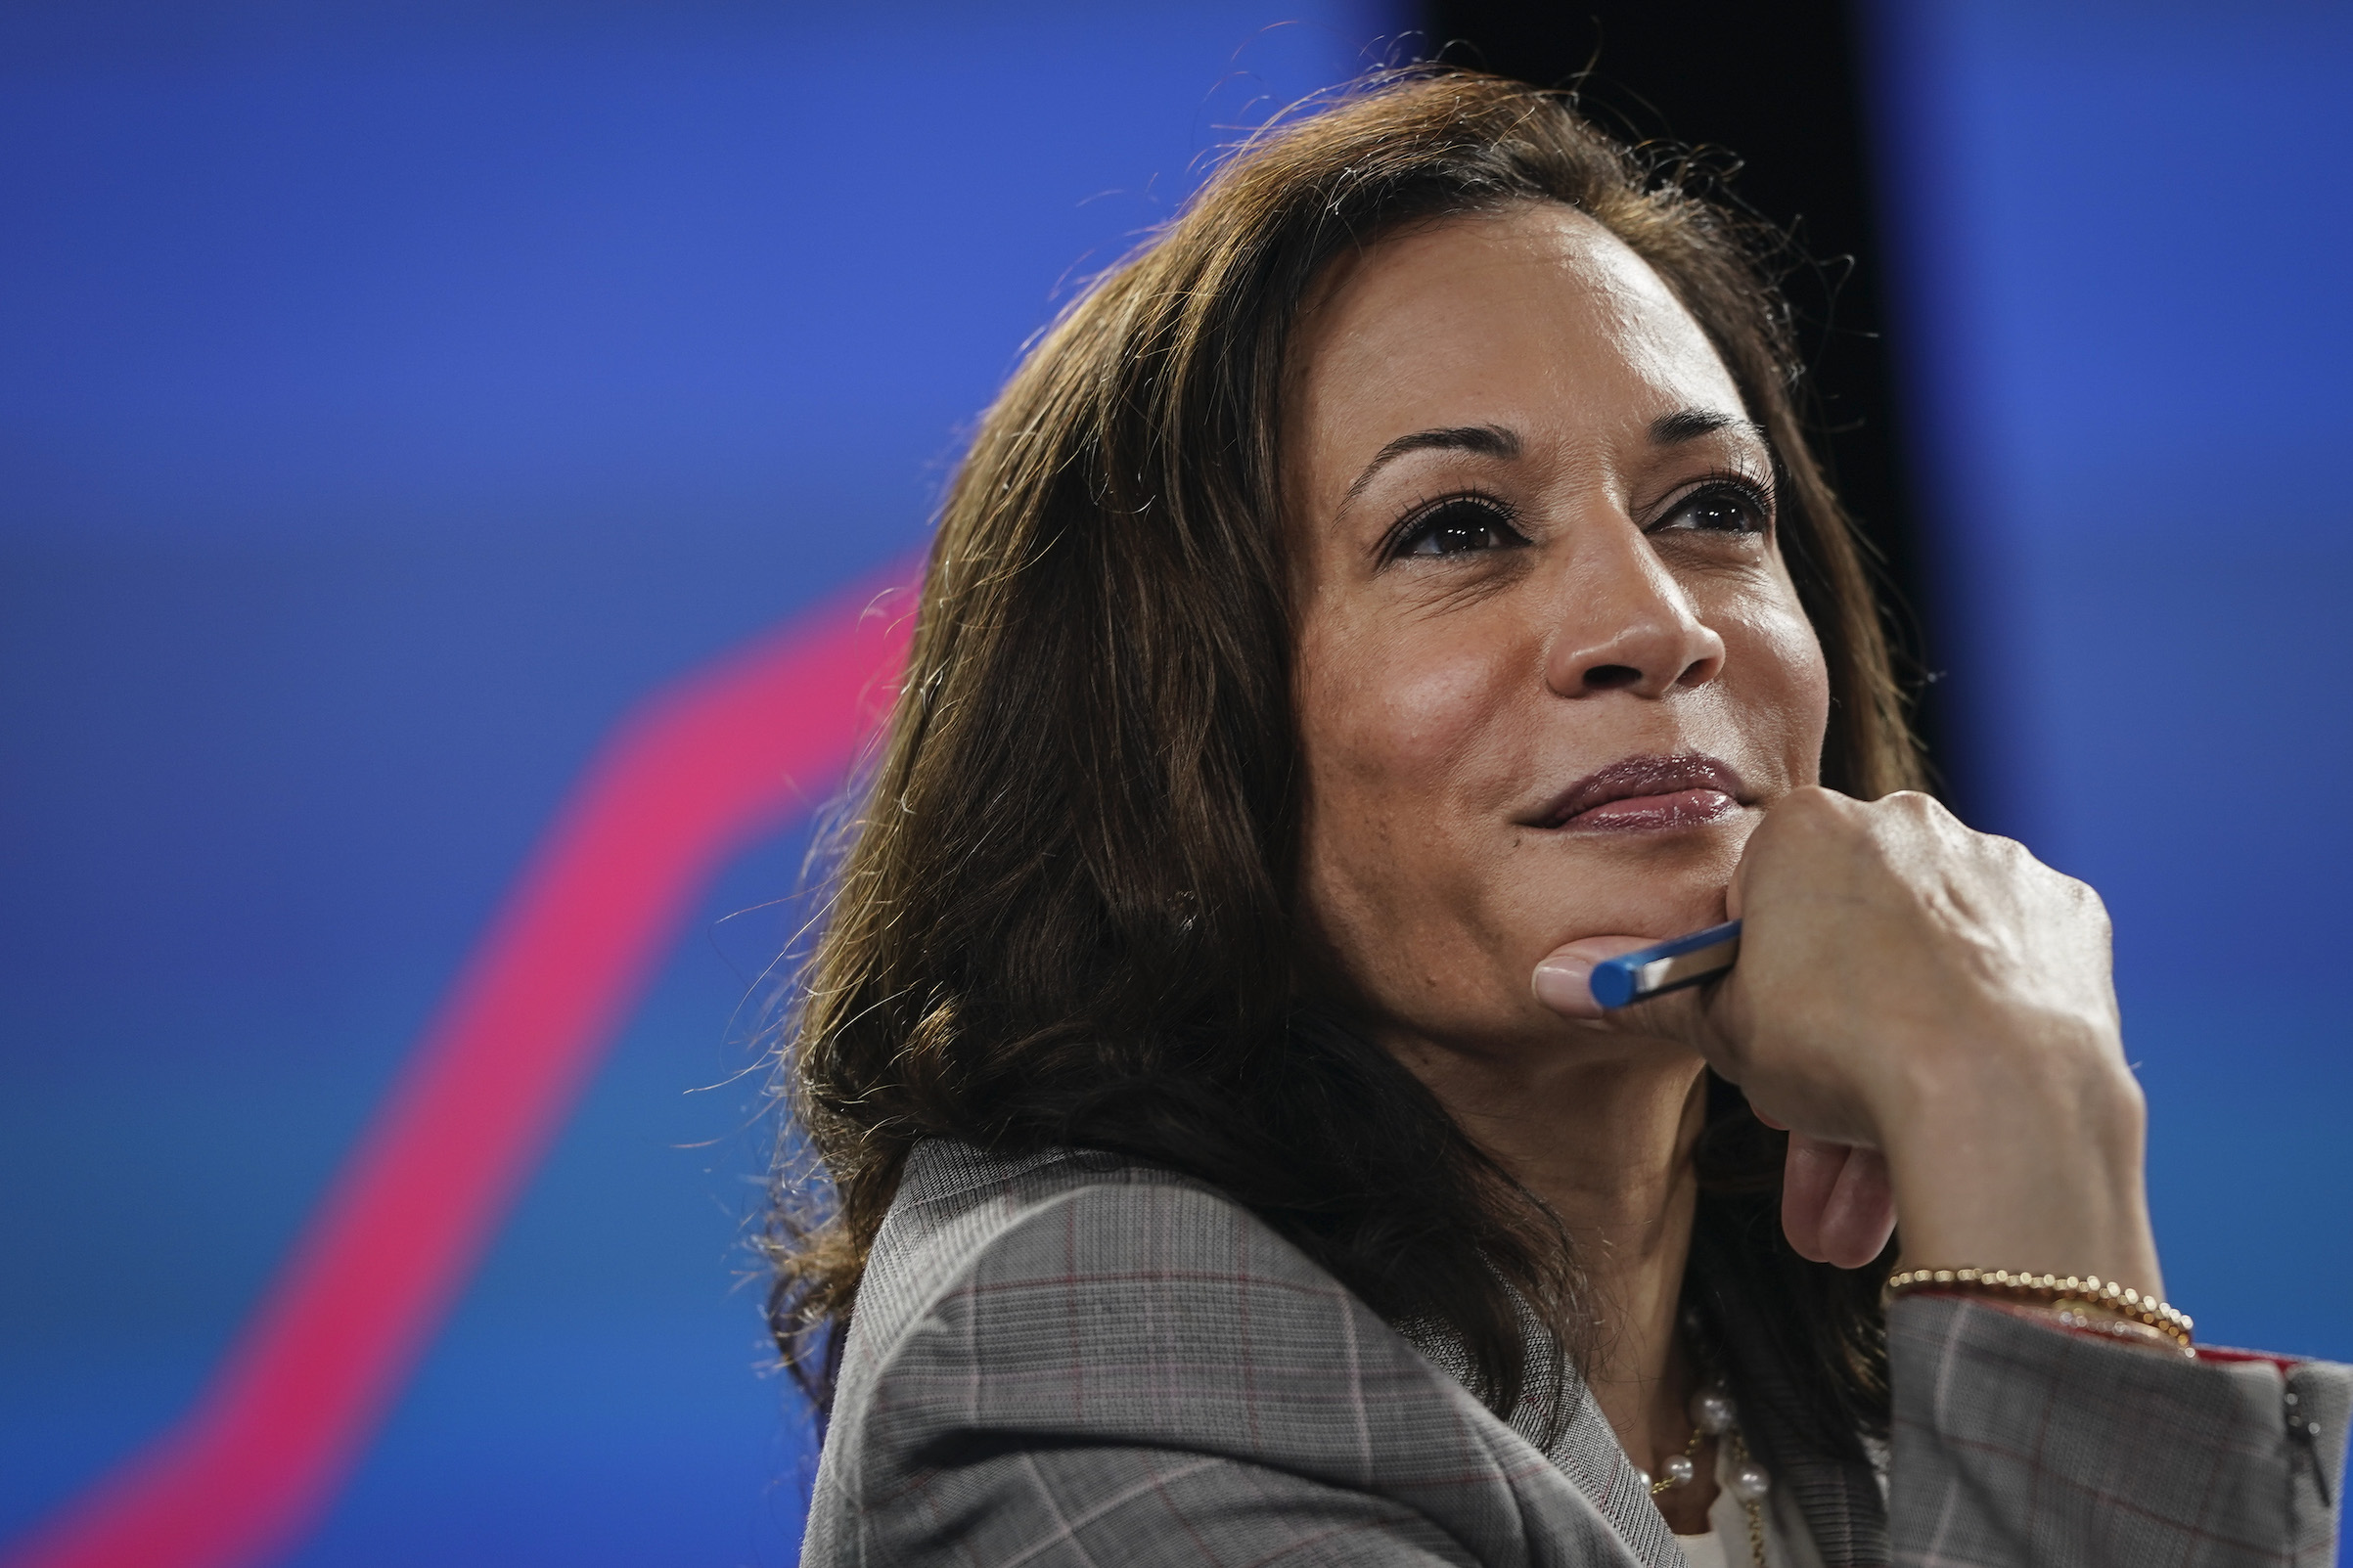 Sen. Kamala Harris (D-CA), running mate of Democratic presidential nominee and former Vice President Joe Biden, attends a coronavirus briefing on Aug. 13, 2020 in Wilmington, Del. (Getty Images)